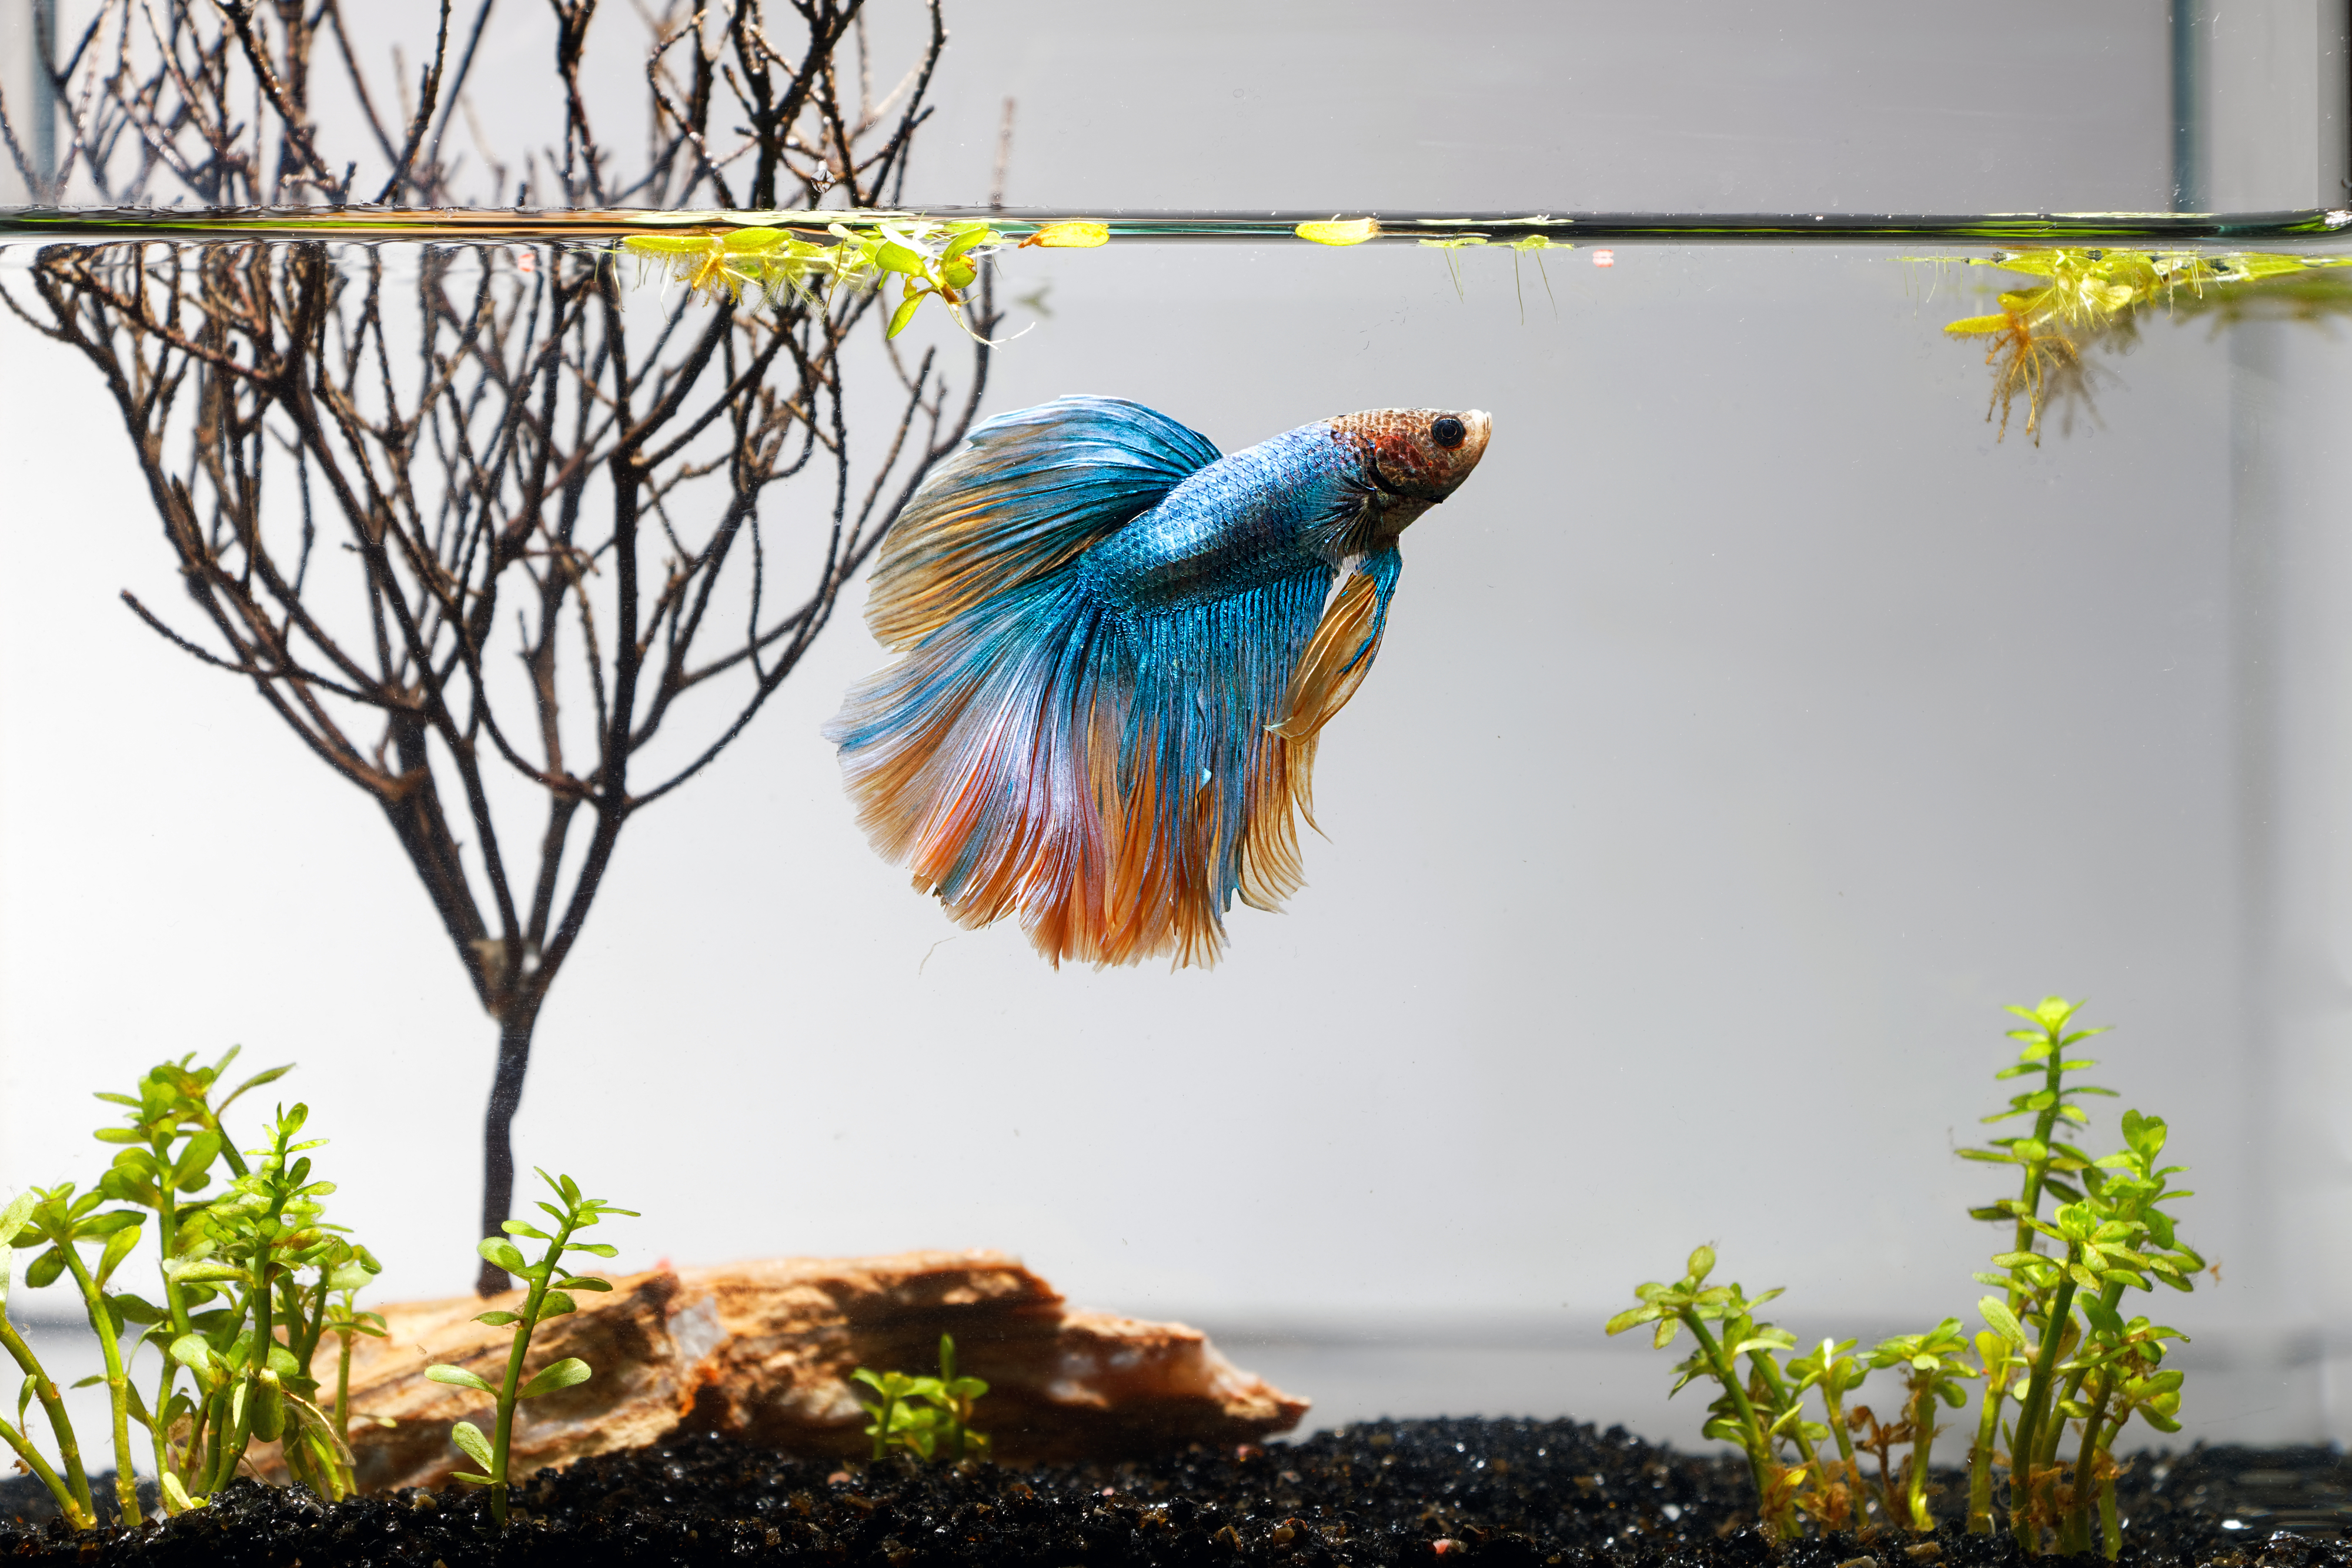 A Betta fish swims near plants and a wooden structure in an aquarium